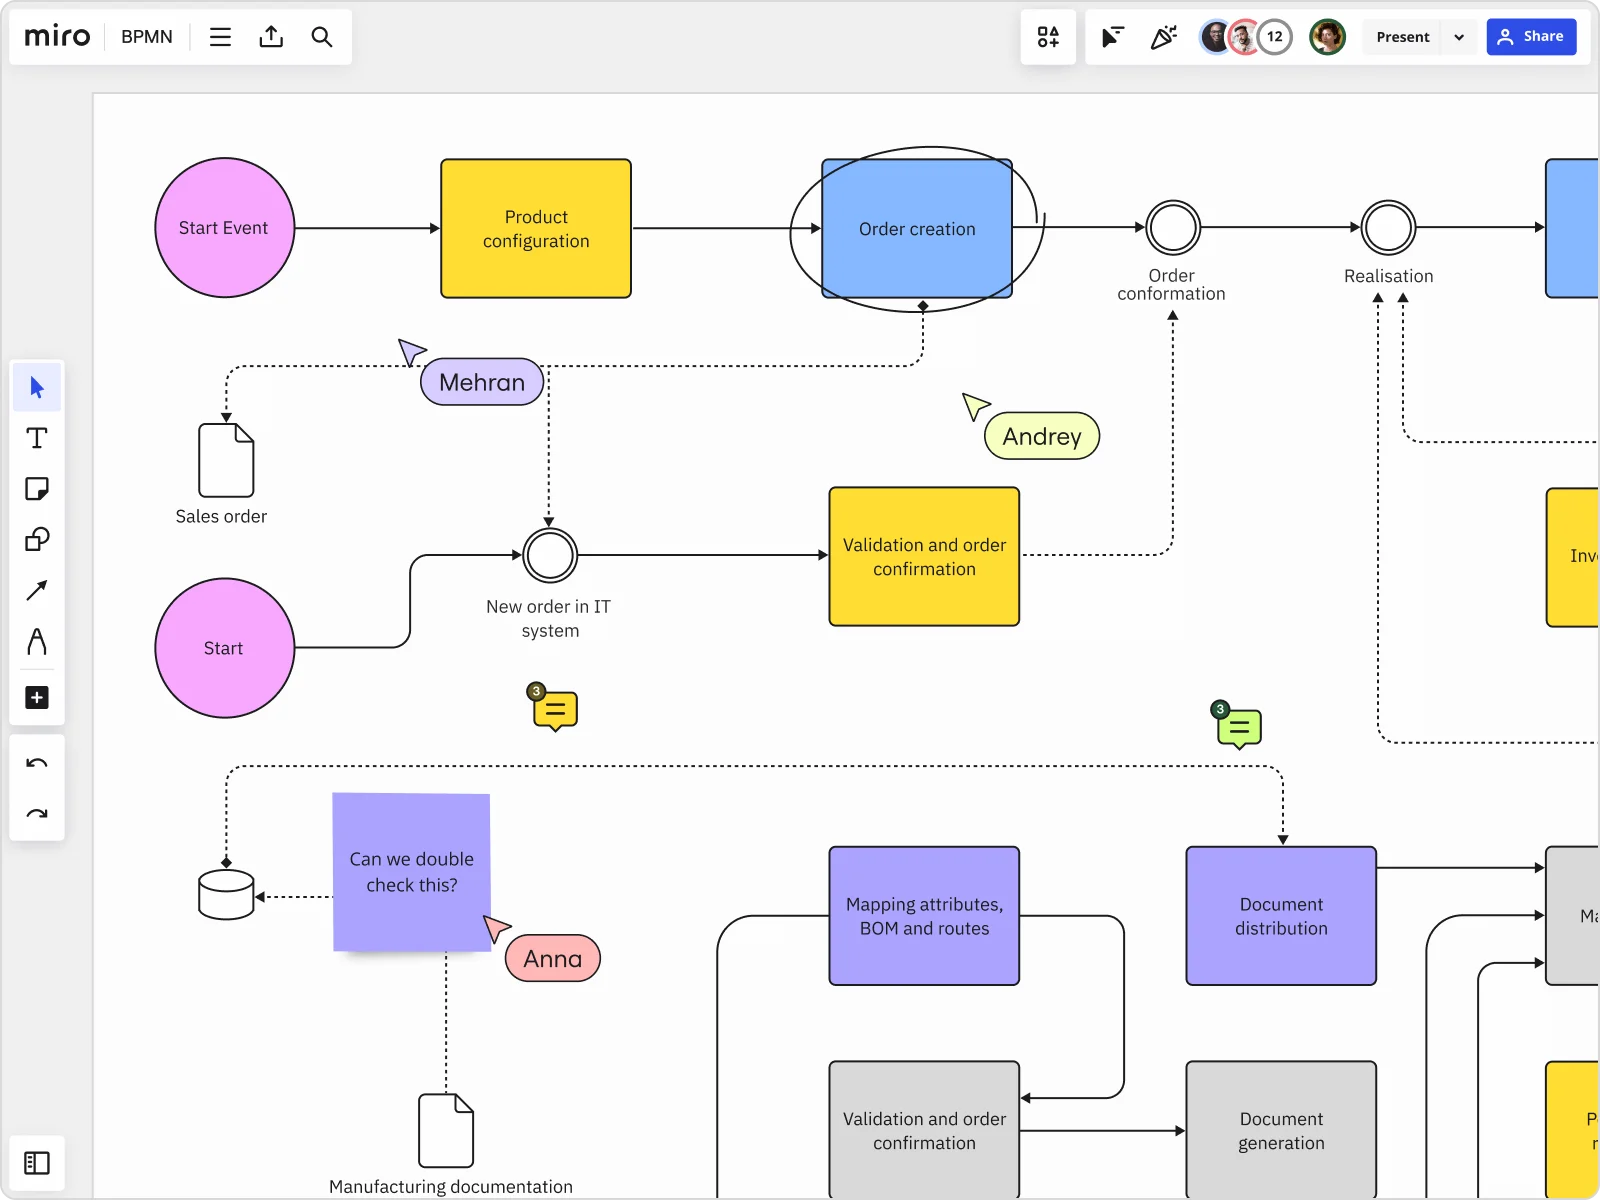 A full-sized image of Miro's online BPMN diagramming tool